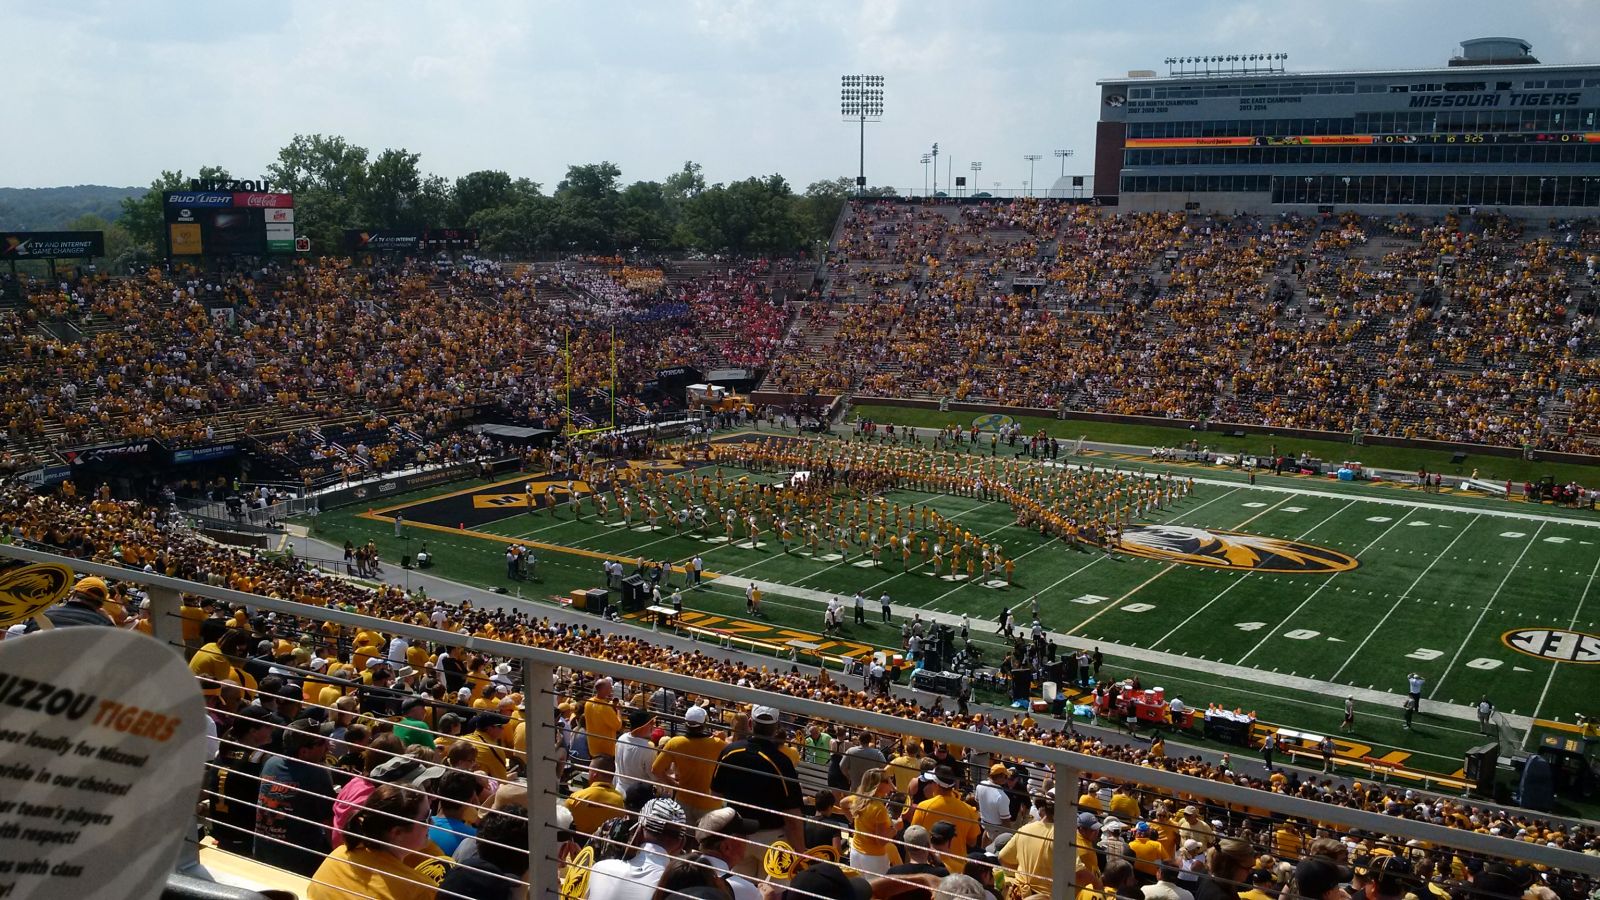 section 213, row 3 seat view  - faurot field